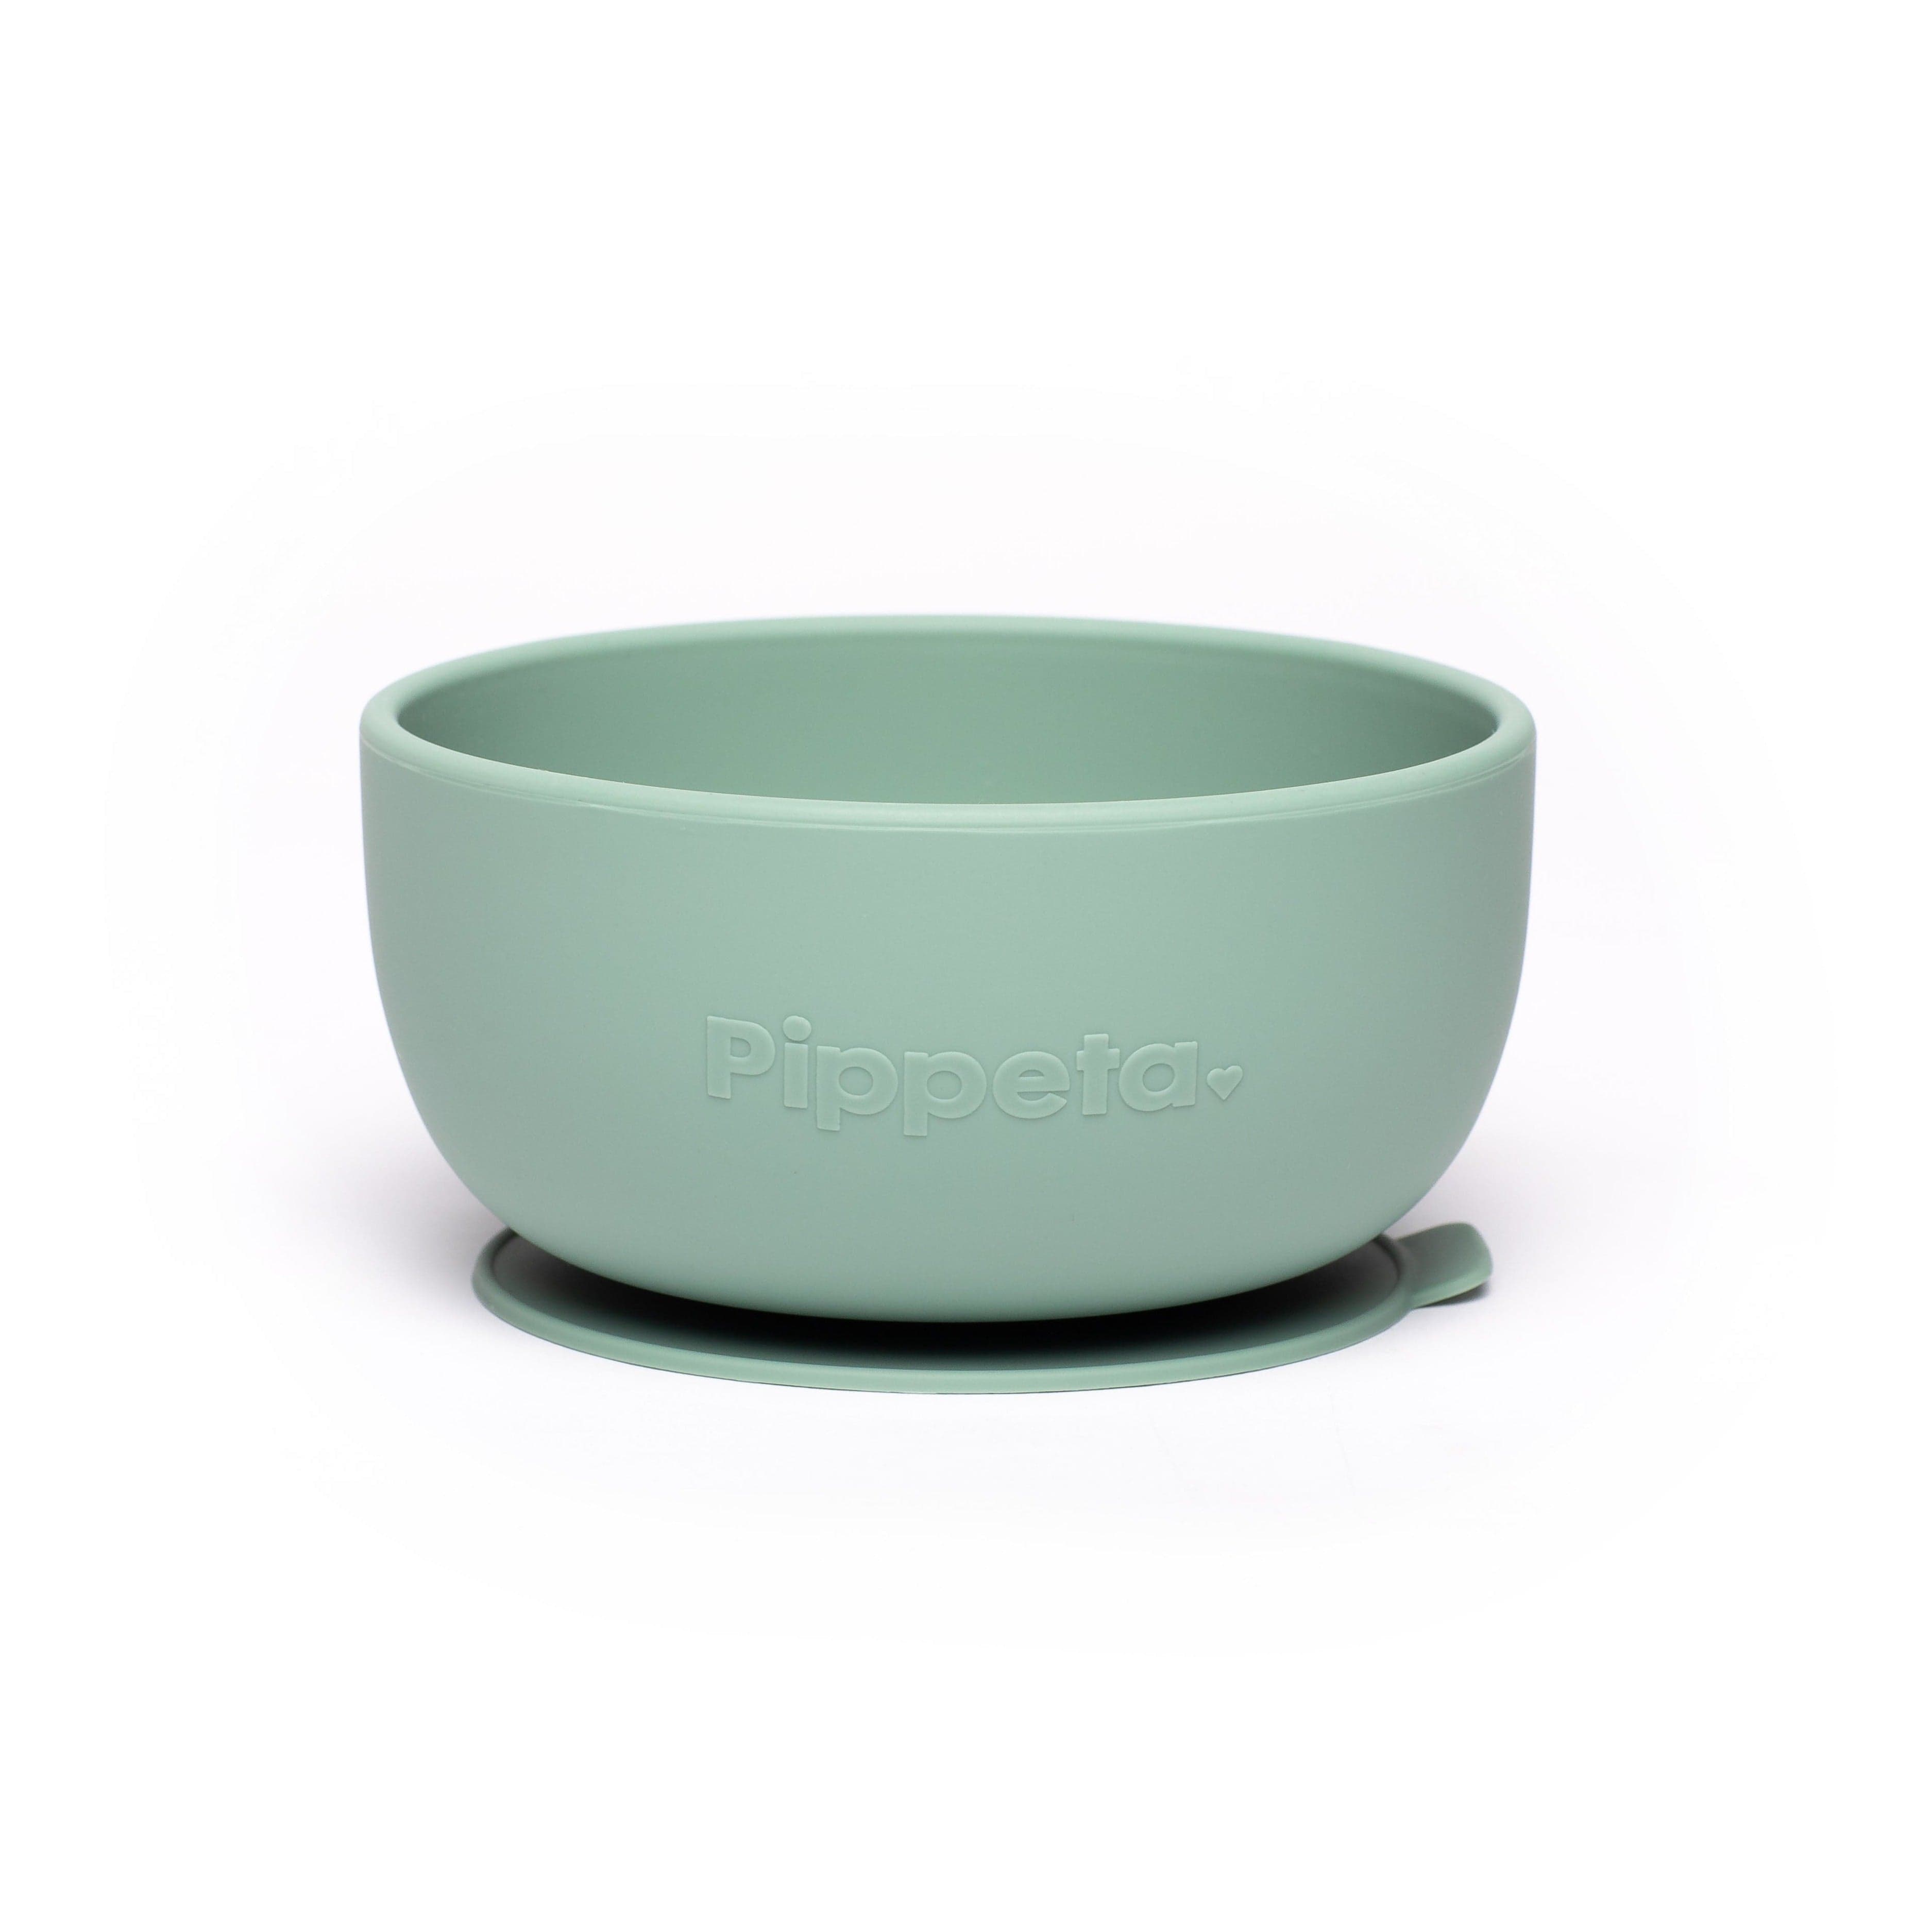 Pippeta Weaning Bowl Silicone Suction Bowl (Meadow Green)